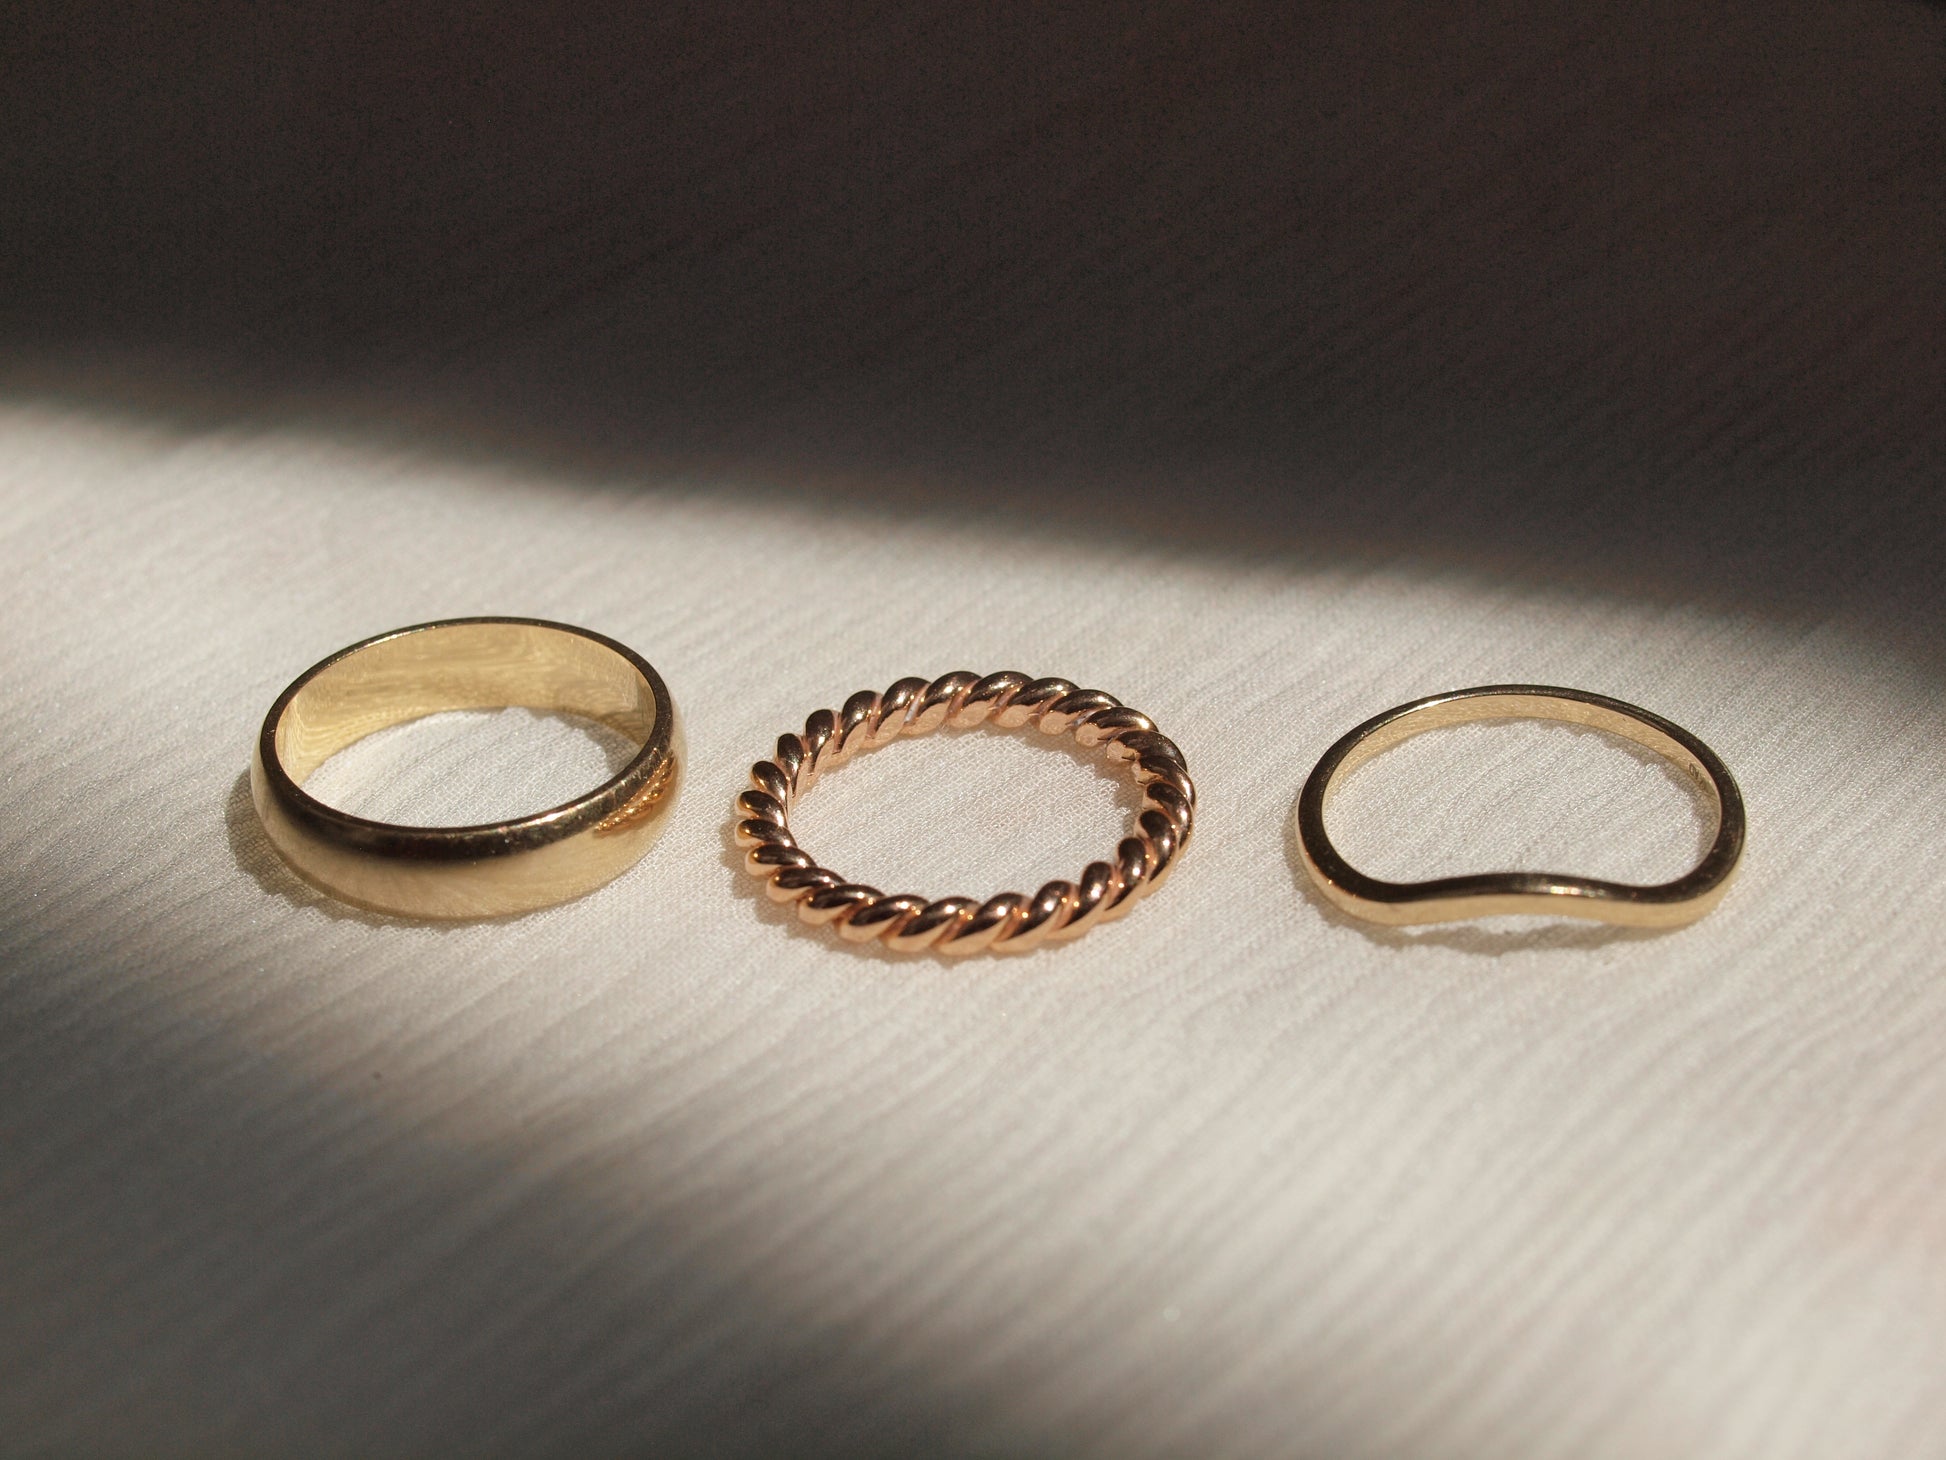 Vintage Gold Rings from left to right: 14k Yellow Gold Thick Band Size 6.25, 19k Rose Gold Twisted Ring Band Size 5, 14k Yellow Gold Waved Ring Size 6.75